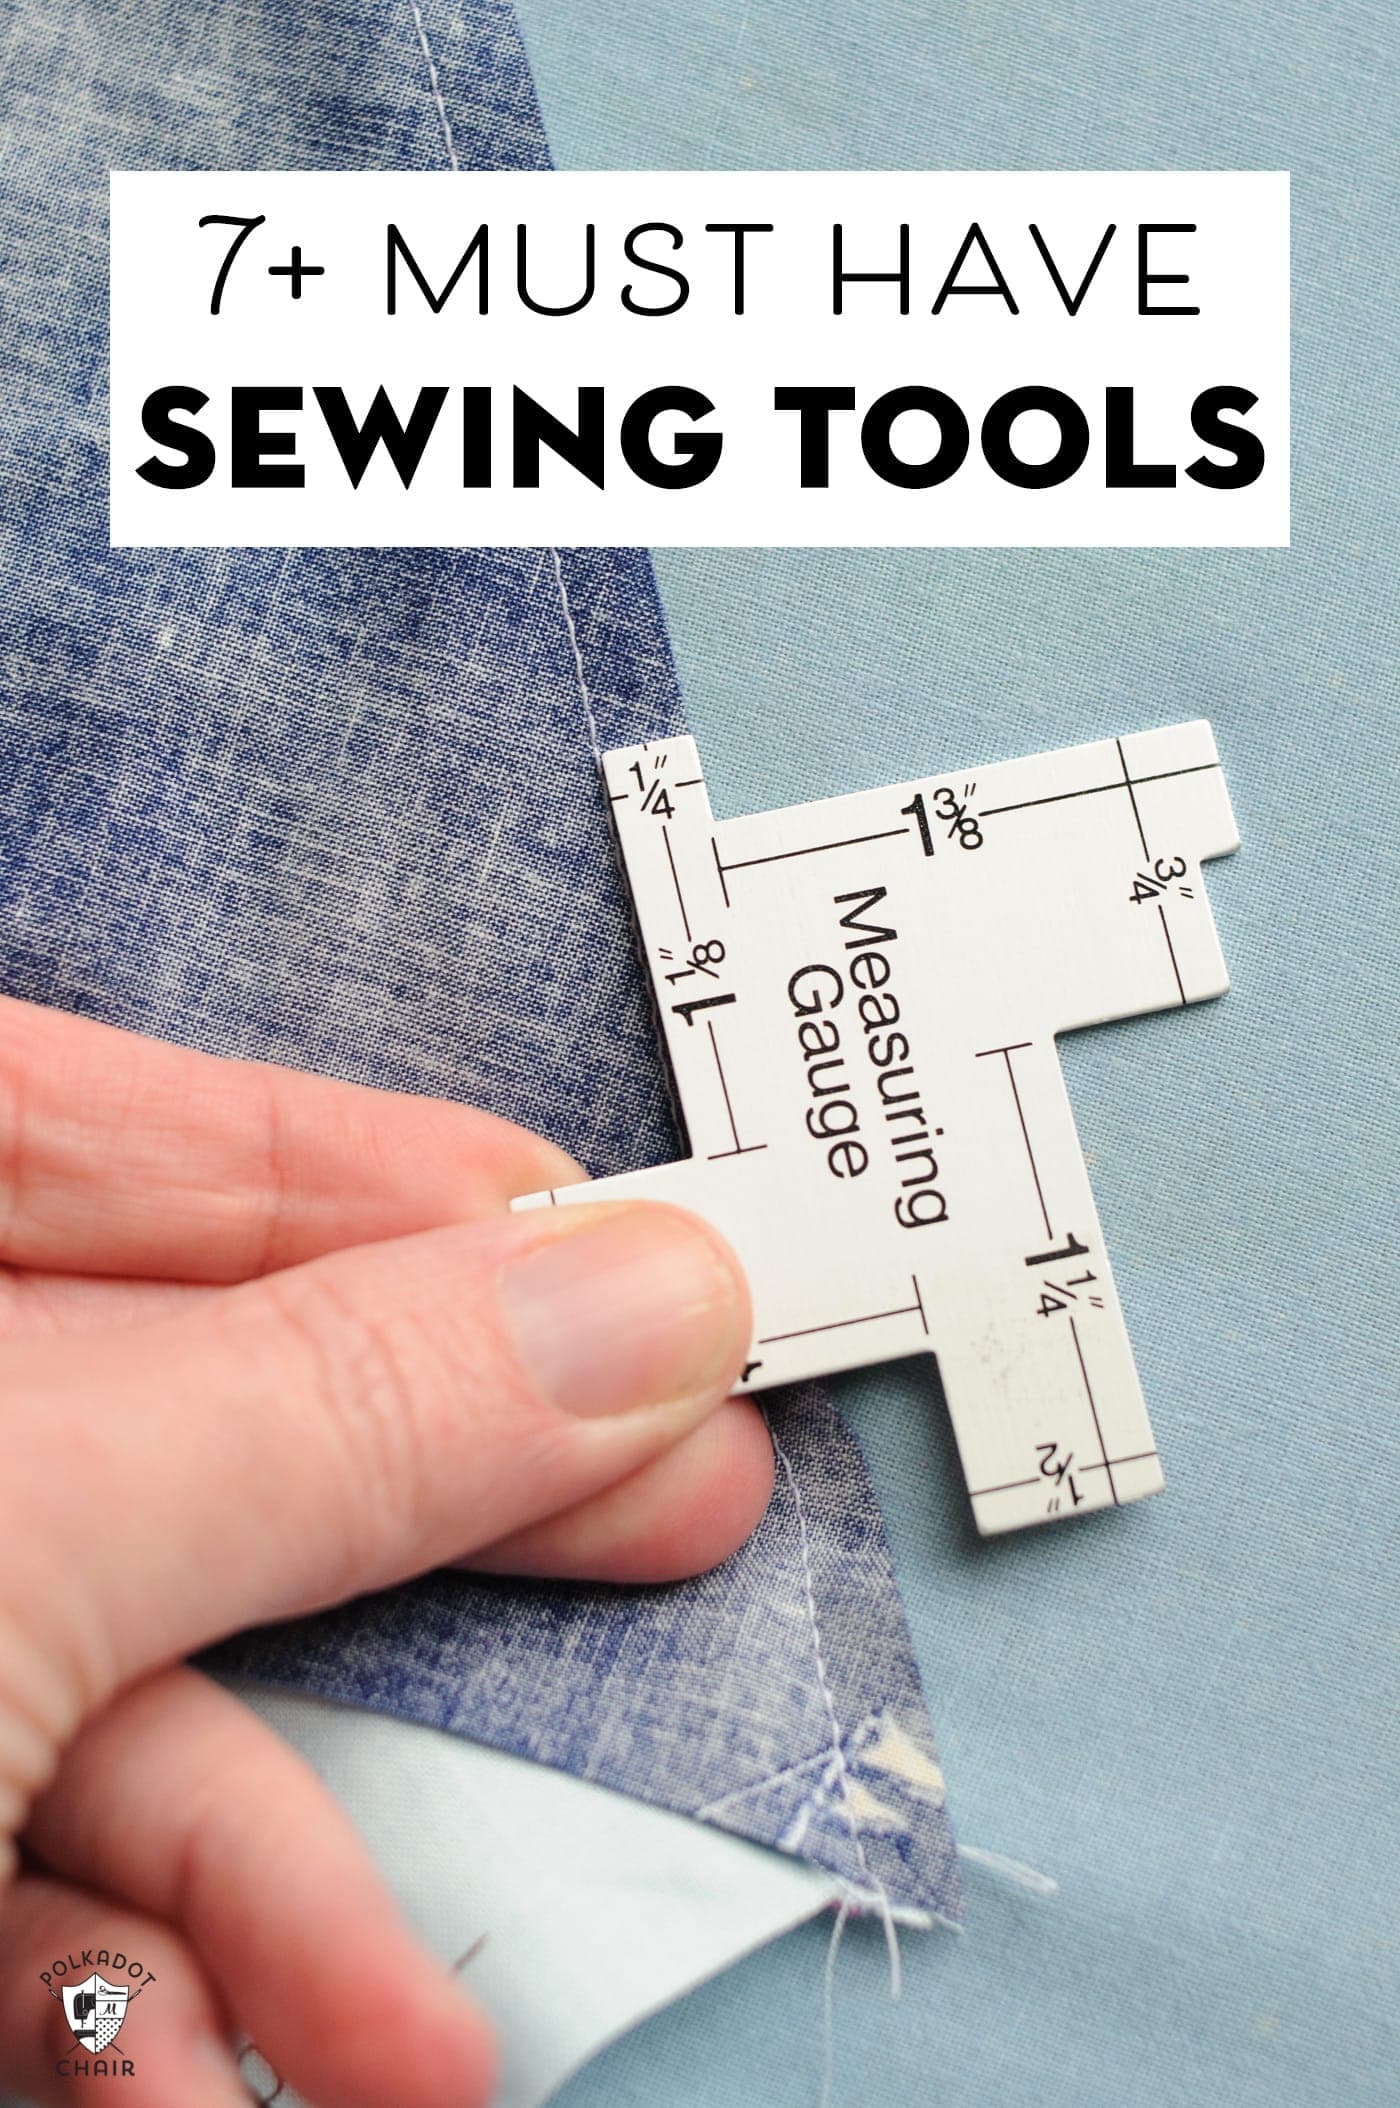 Top 10 Essential Sewing Supplies for Beginners